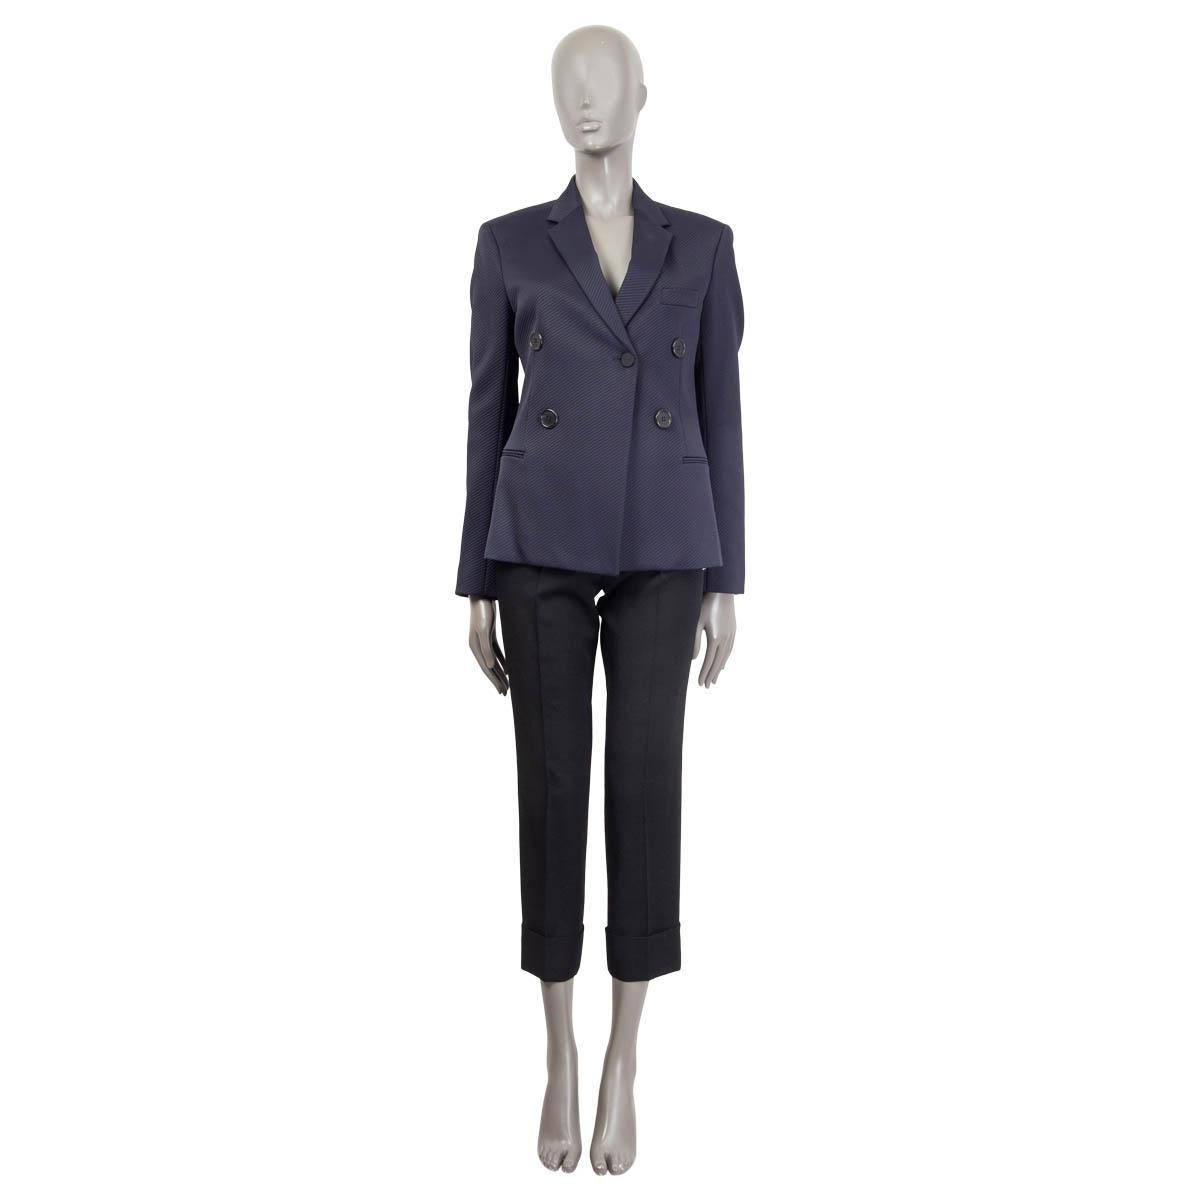 100% authentic Celine double-breasted jacket in midnight blue viscose (96%) and elastane (4%). Features two faux front slit pockets and buttoned cuffs. Opens with one button on the front. Semi-lined in midnight blue silk (100%). Has been worn and